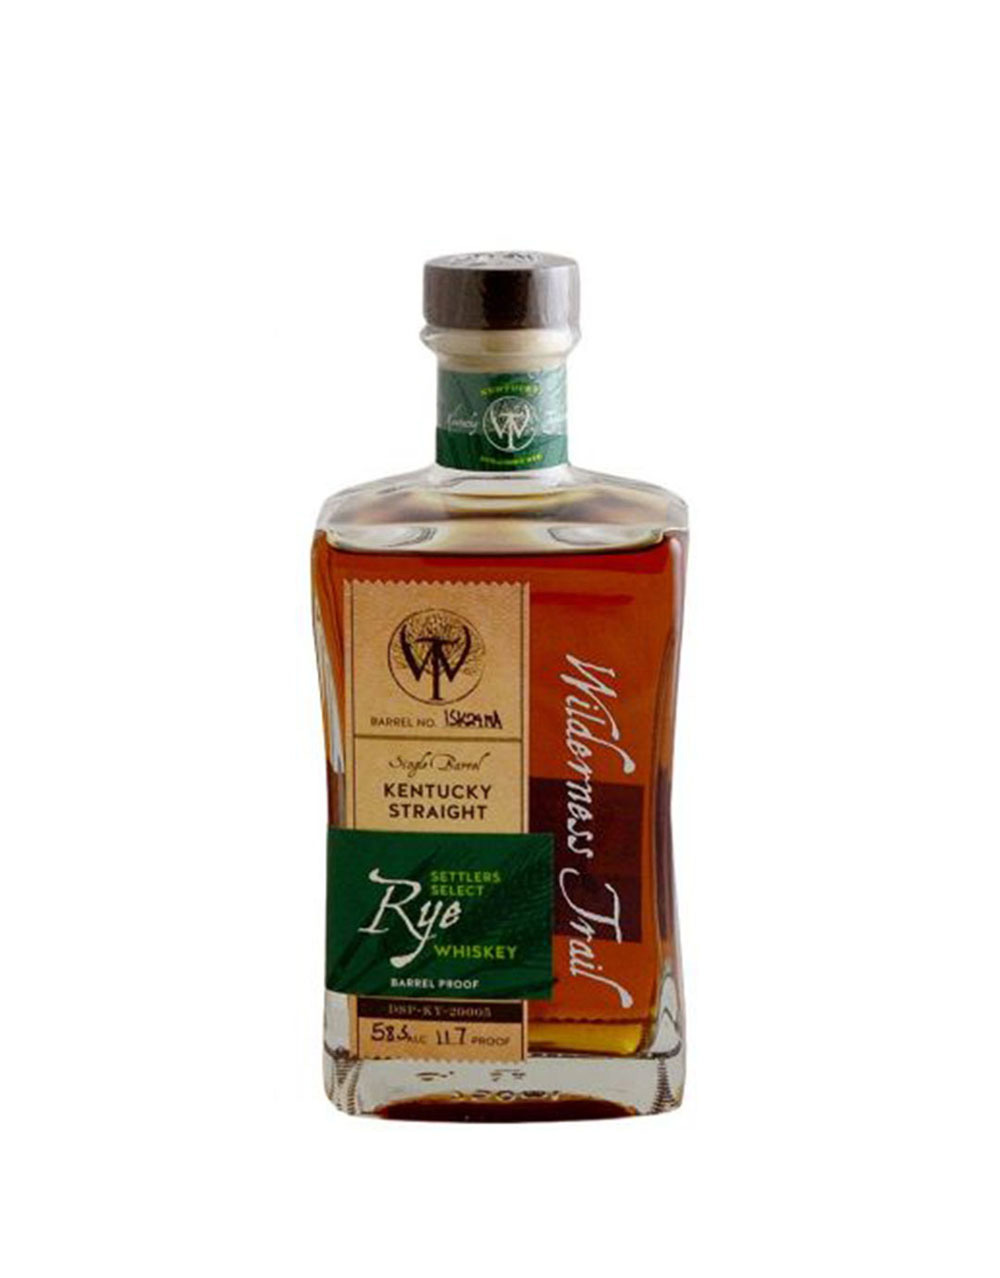 A.D. Rattray Cask Collection Mortlach 22 Year Old Singce Malt Scotch Whisky